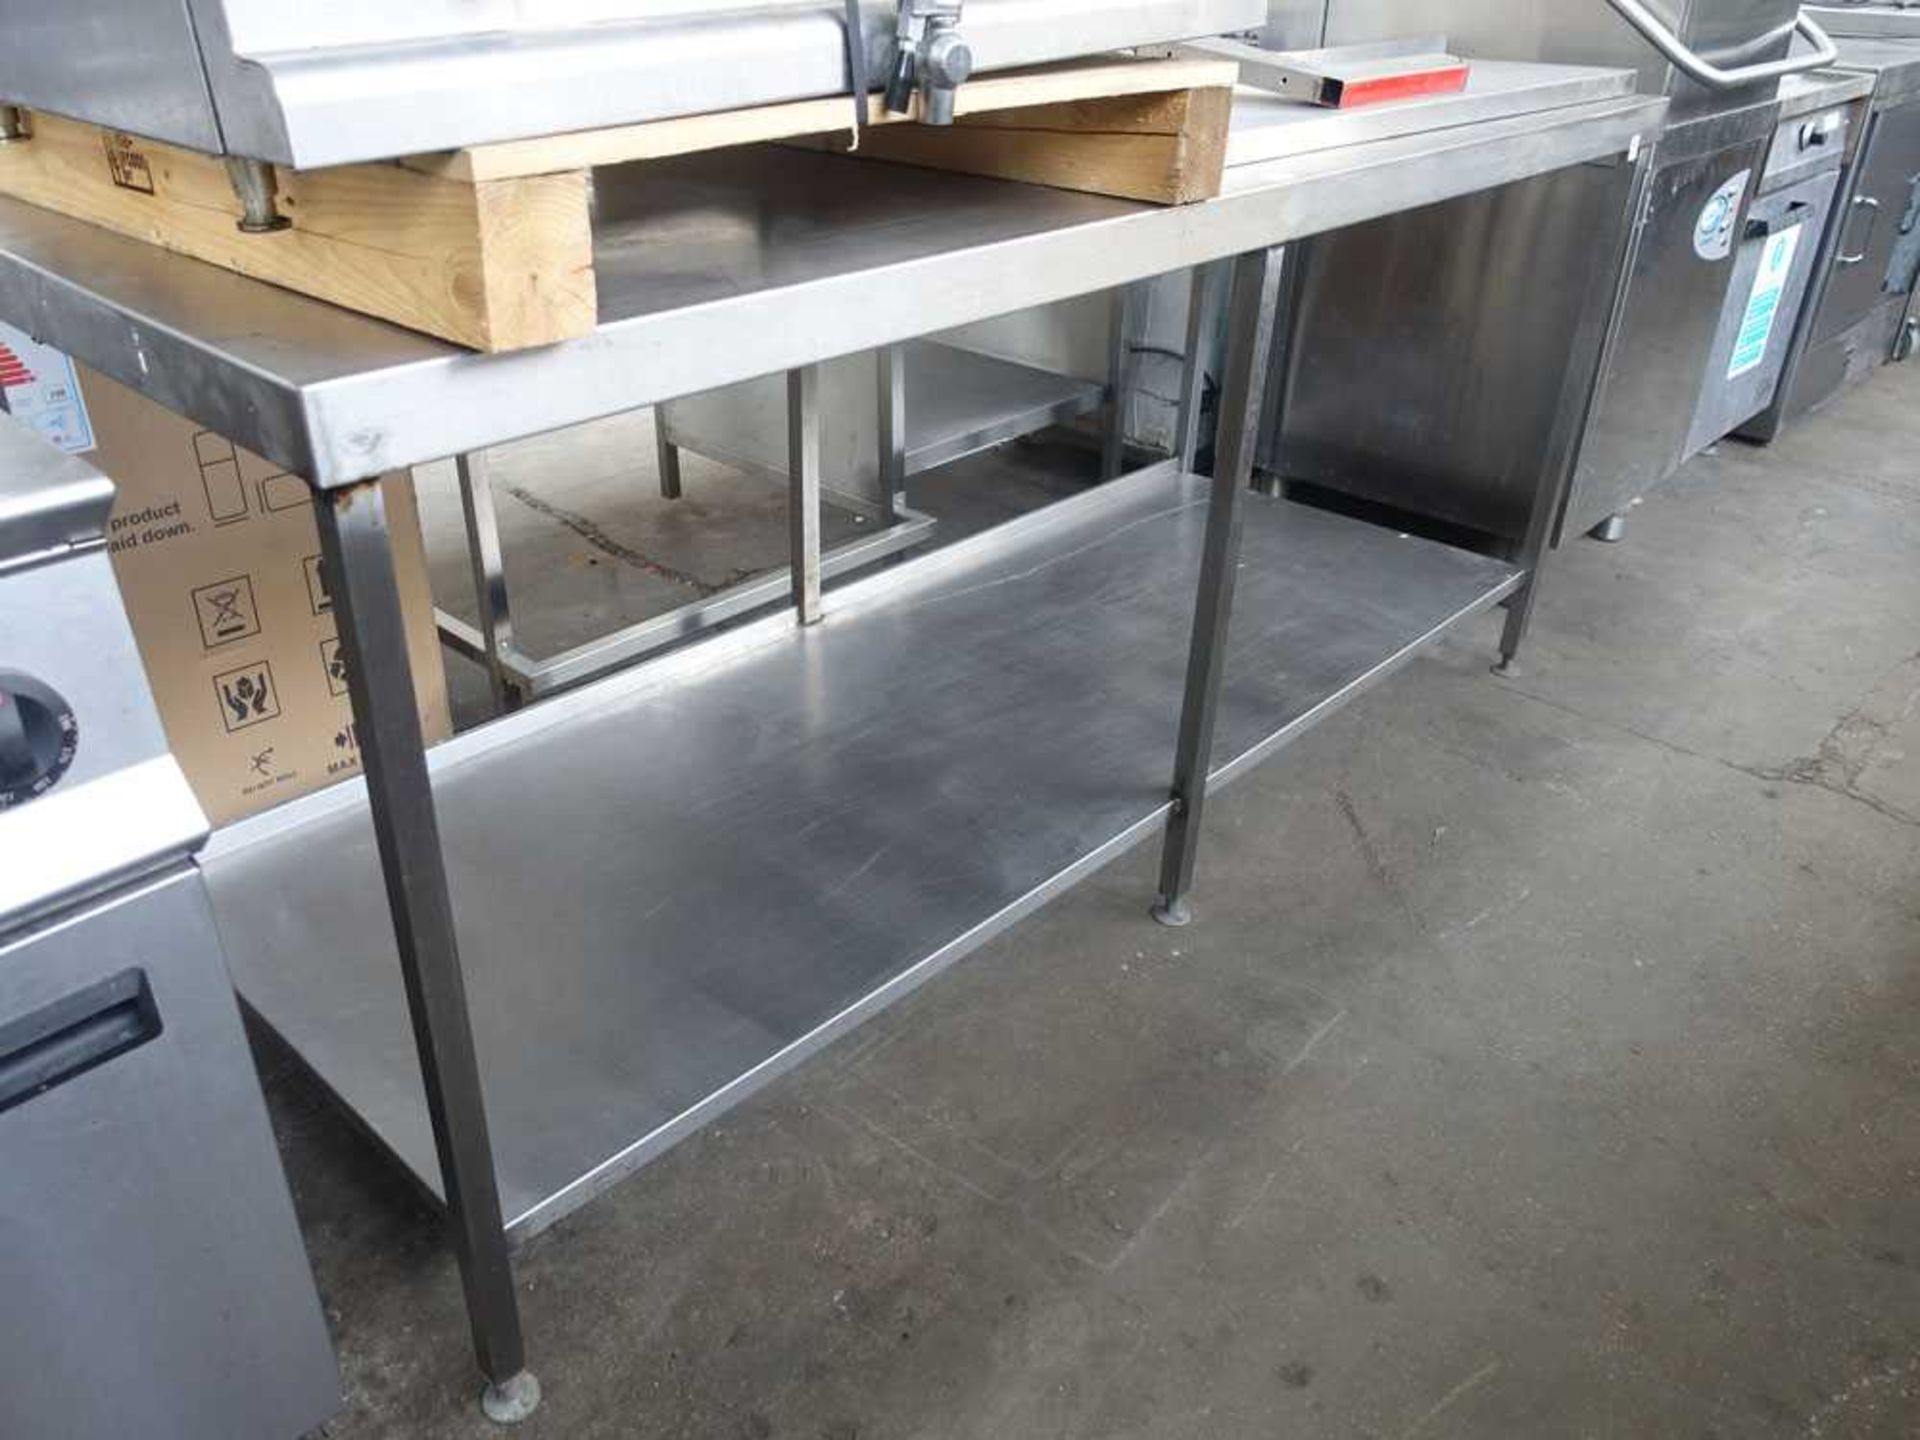 200cm stainless steel preparation table with shelf under